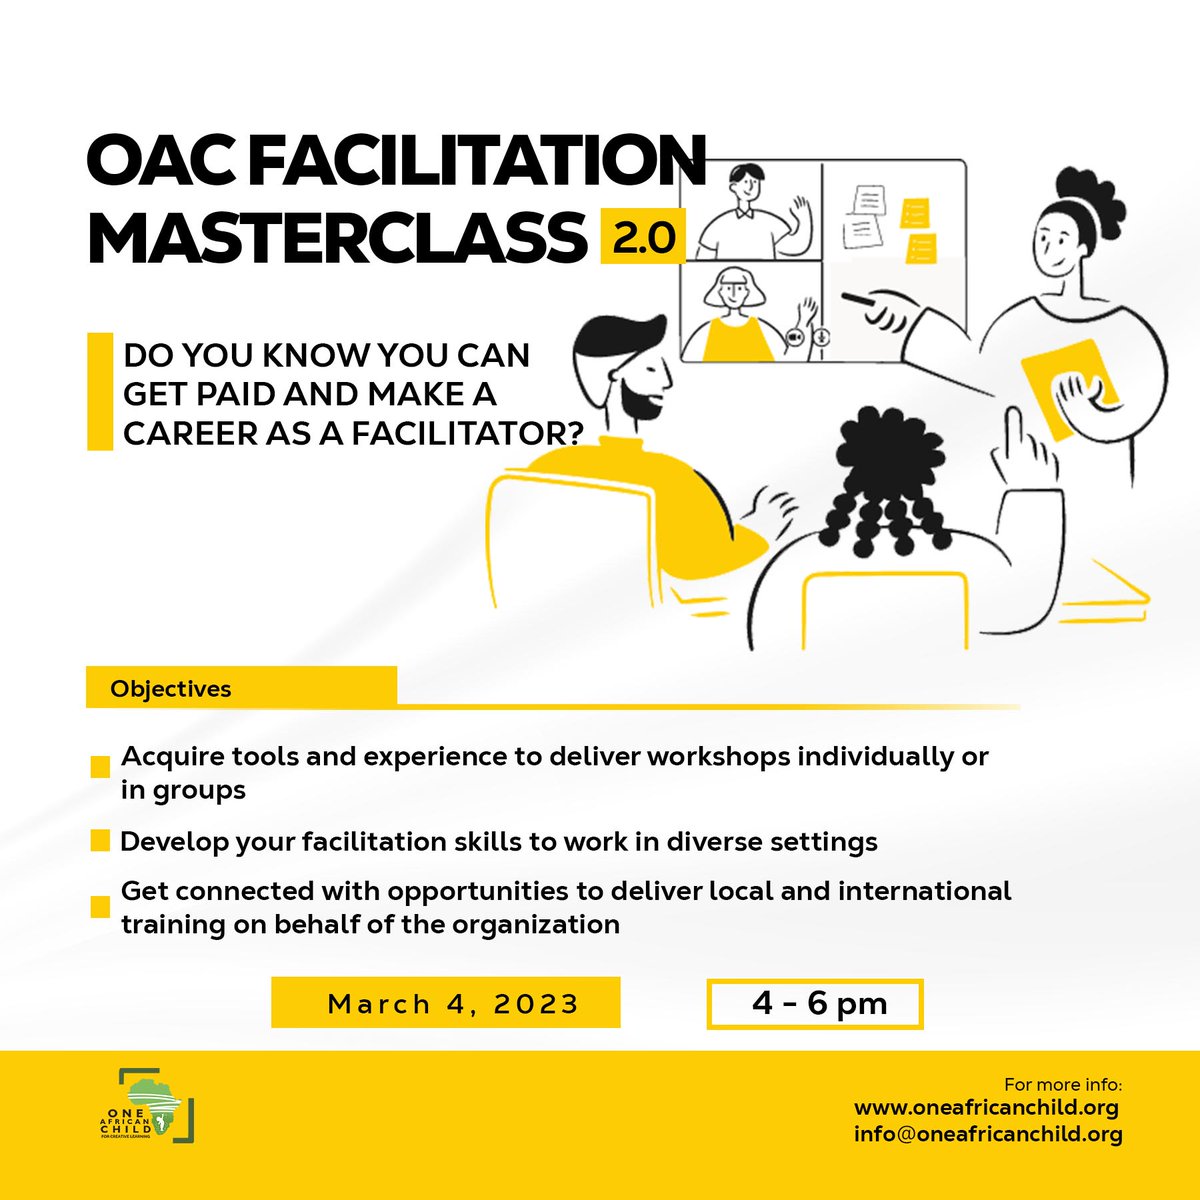 Two more days until our internal #Facilitation Masterclass!!

Experience trumps everything and we are excited to enhance the #capacity of our youth representatives to deliver effective programs for OneAfricanChild locally and globally.